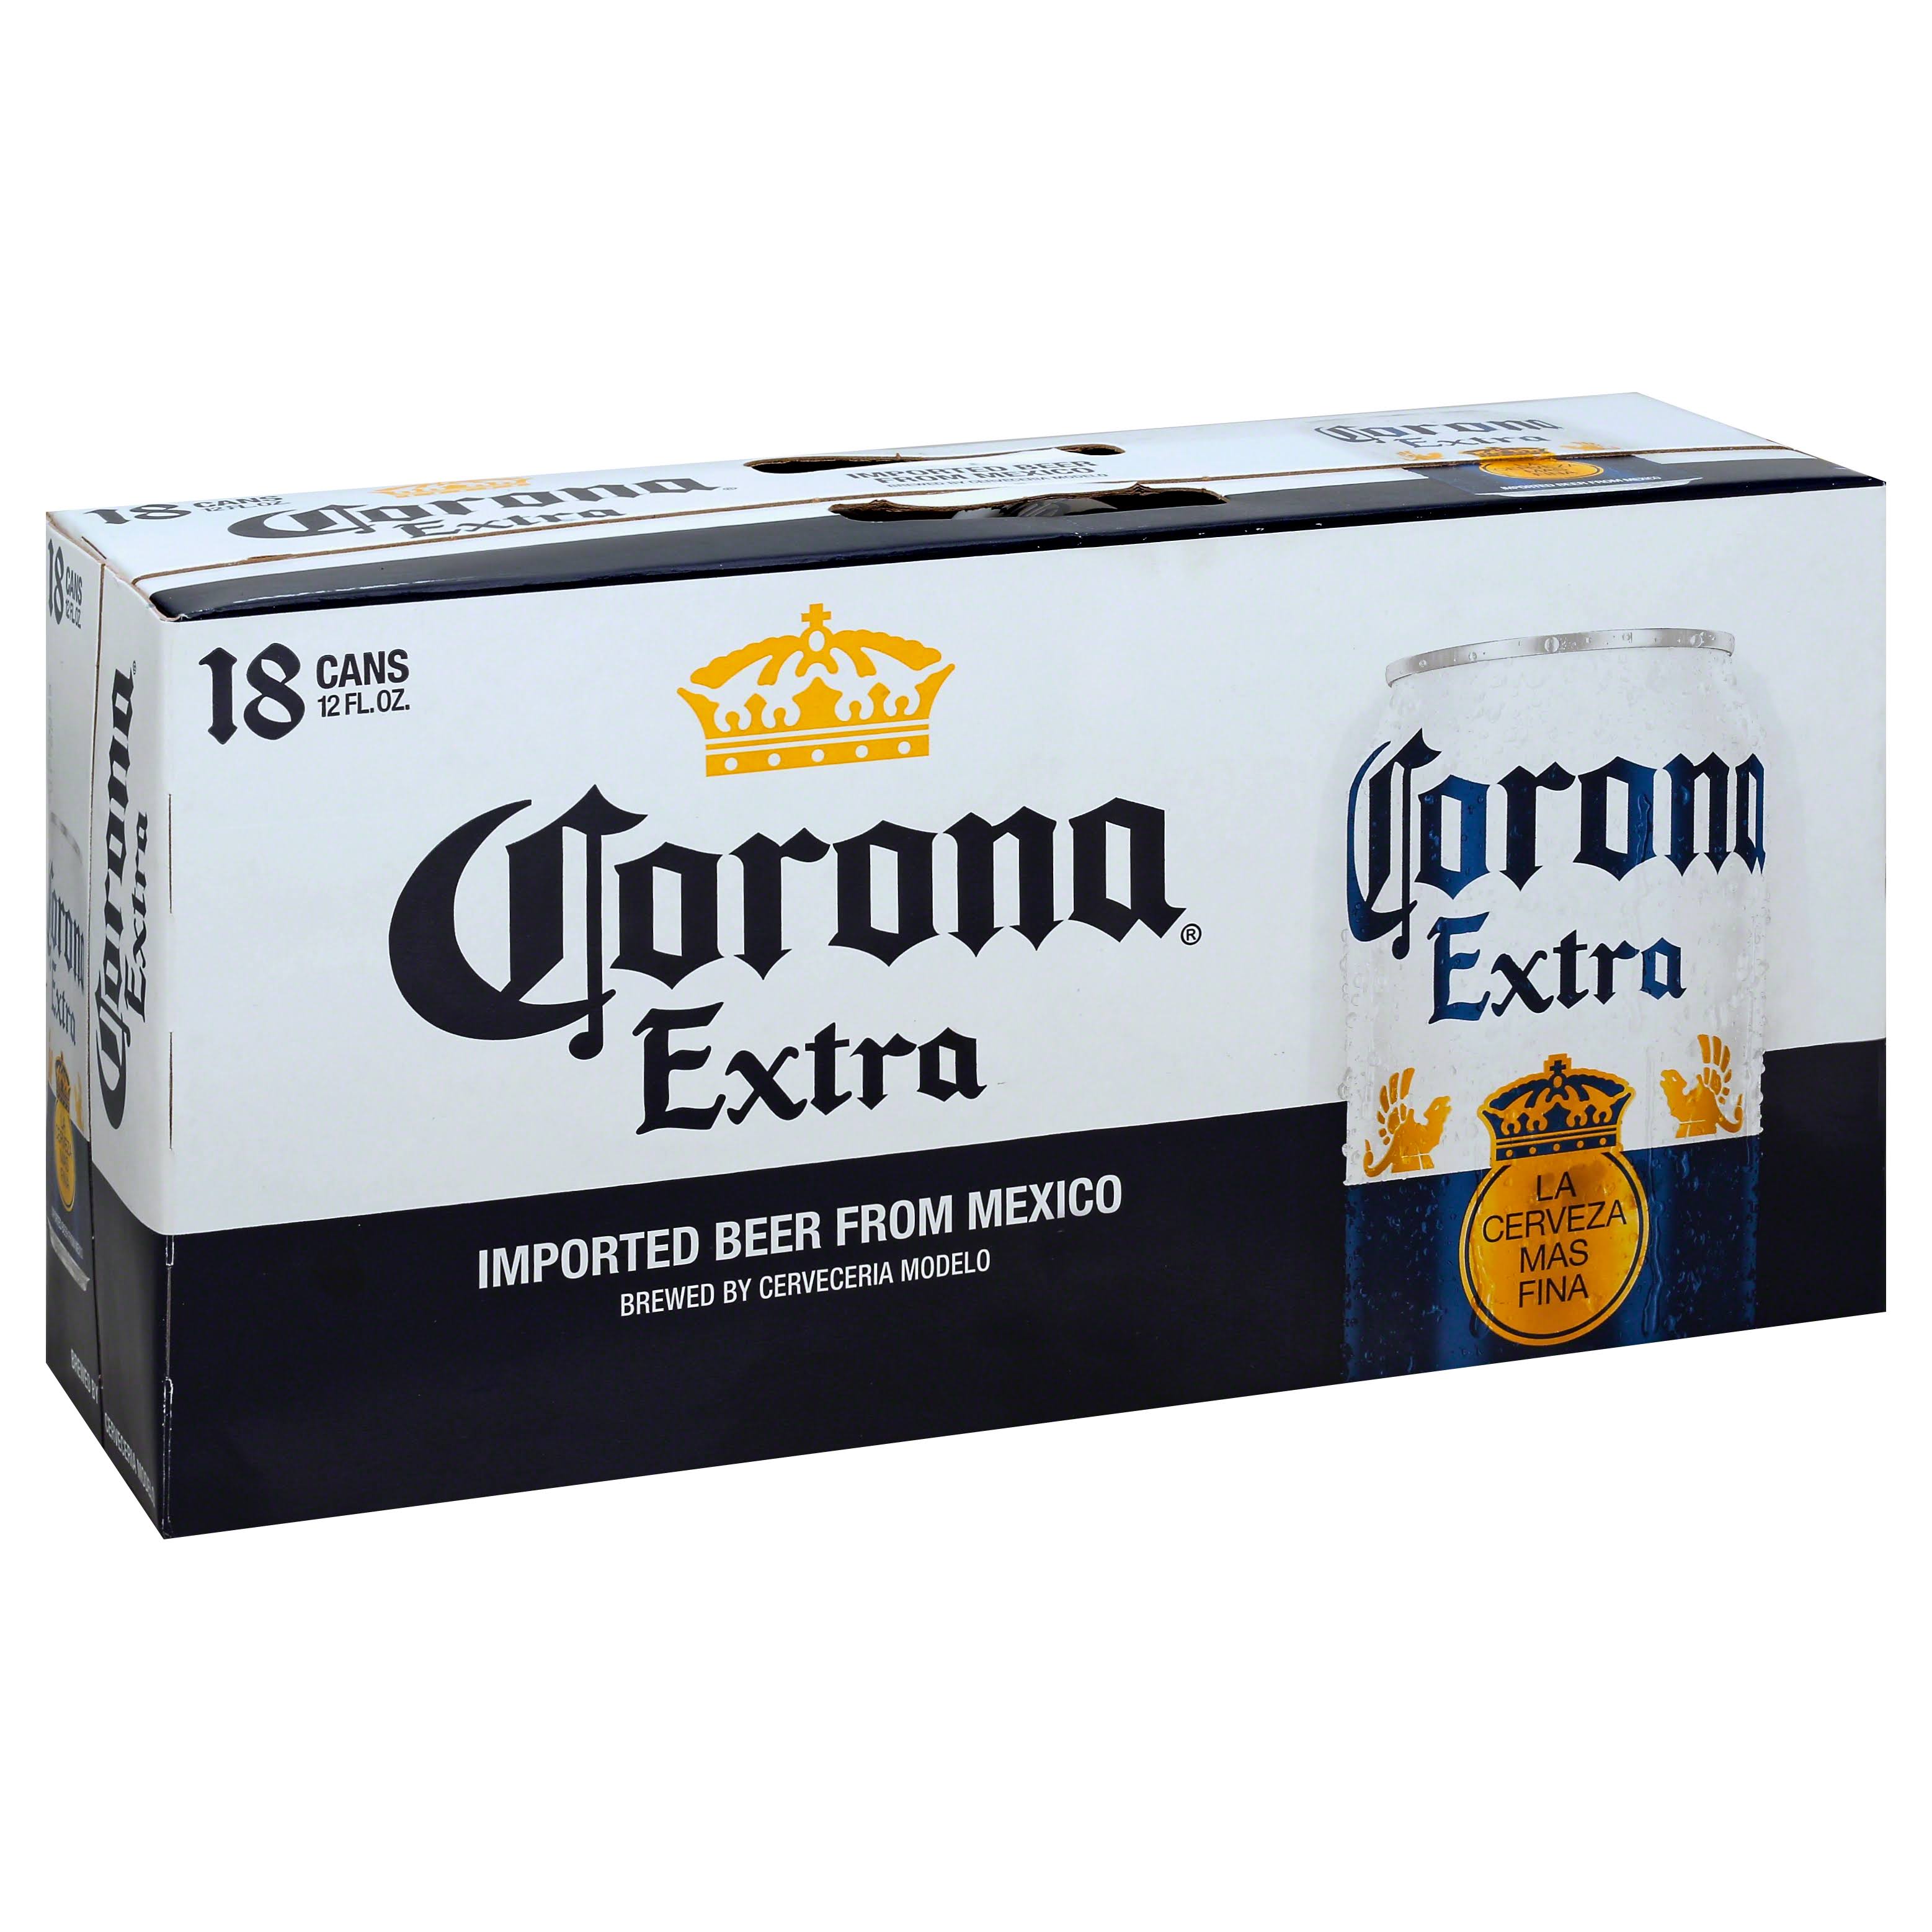 Corona Extra Beer - 18 pack, 12 fl oz cans